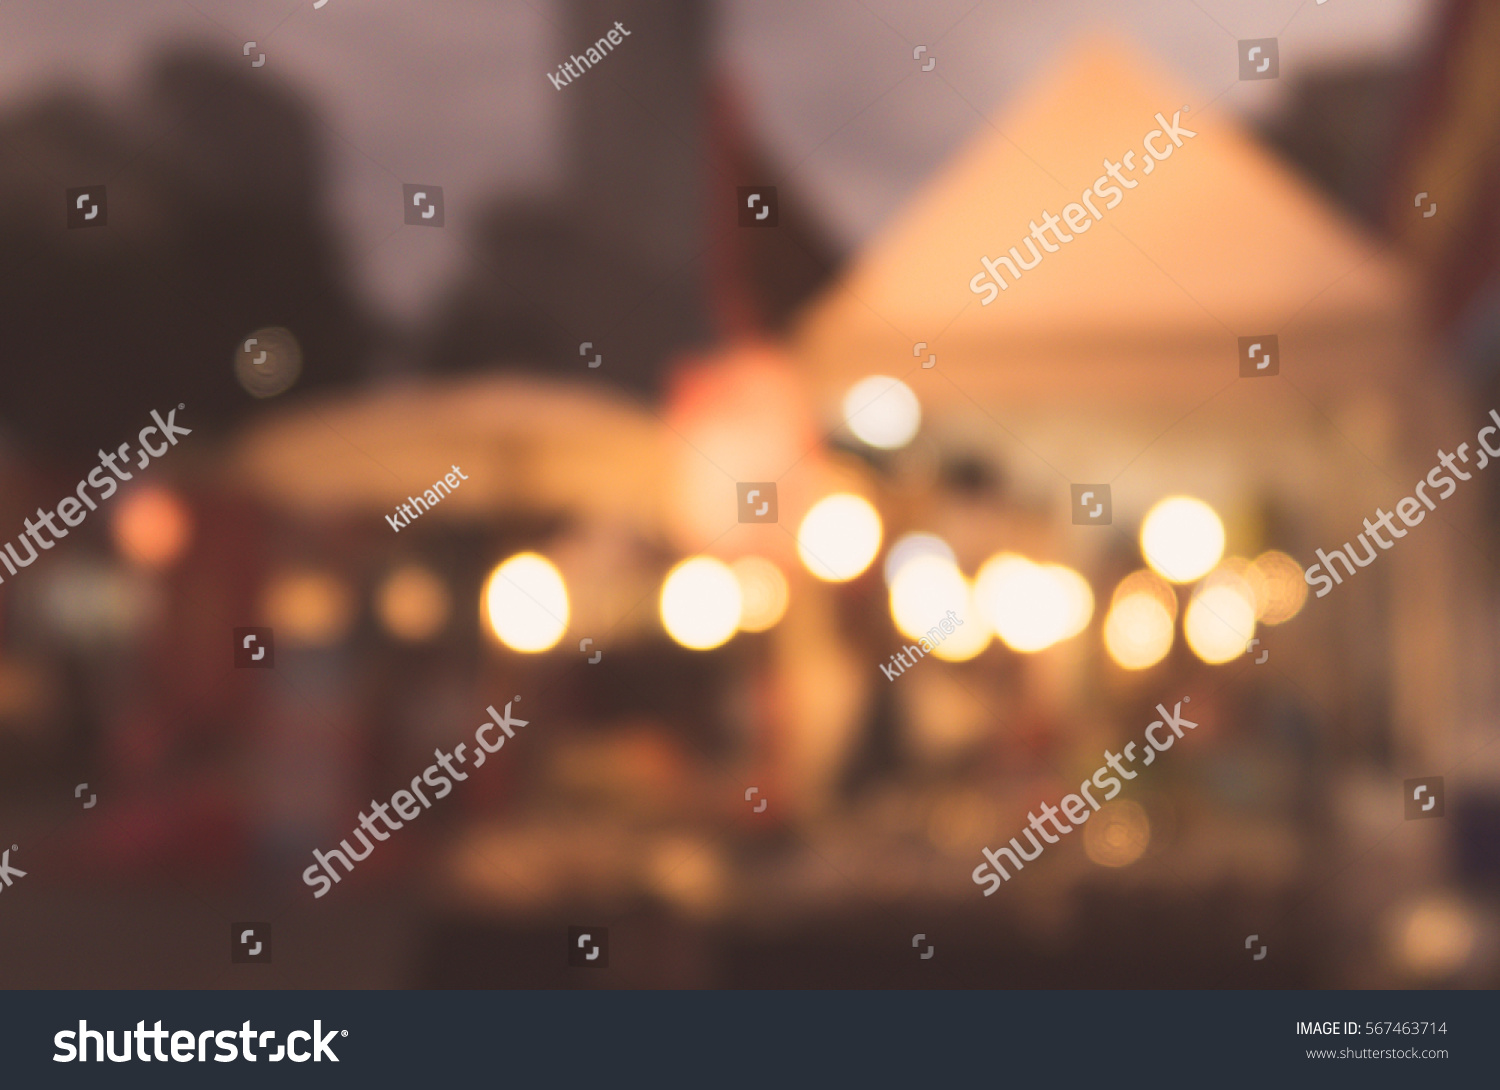 blurred image of nobody in street  markets #567463714